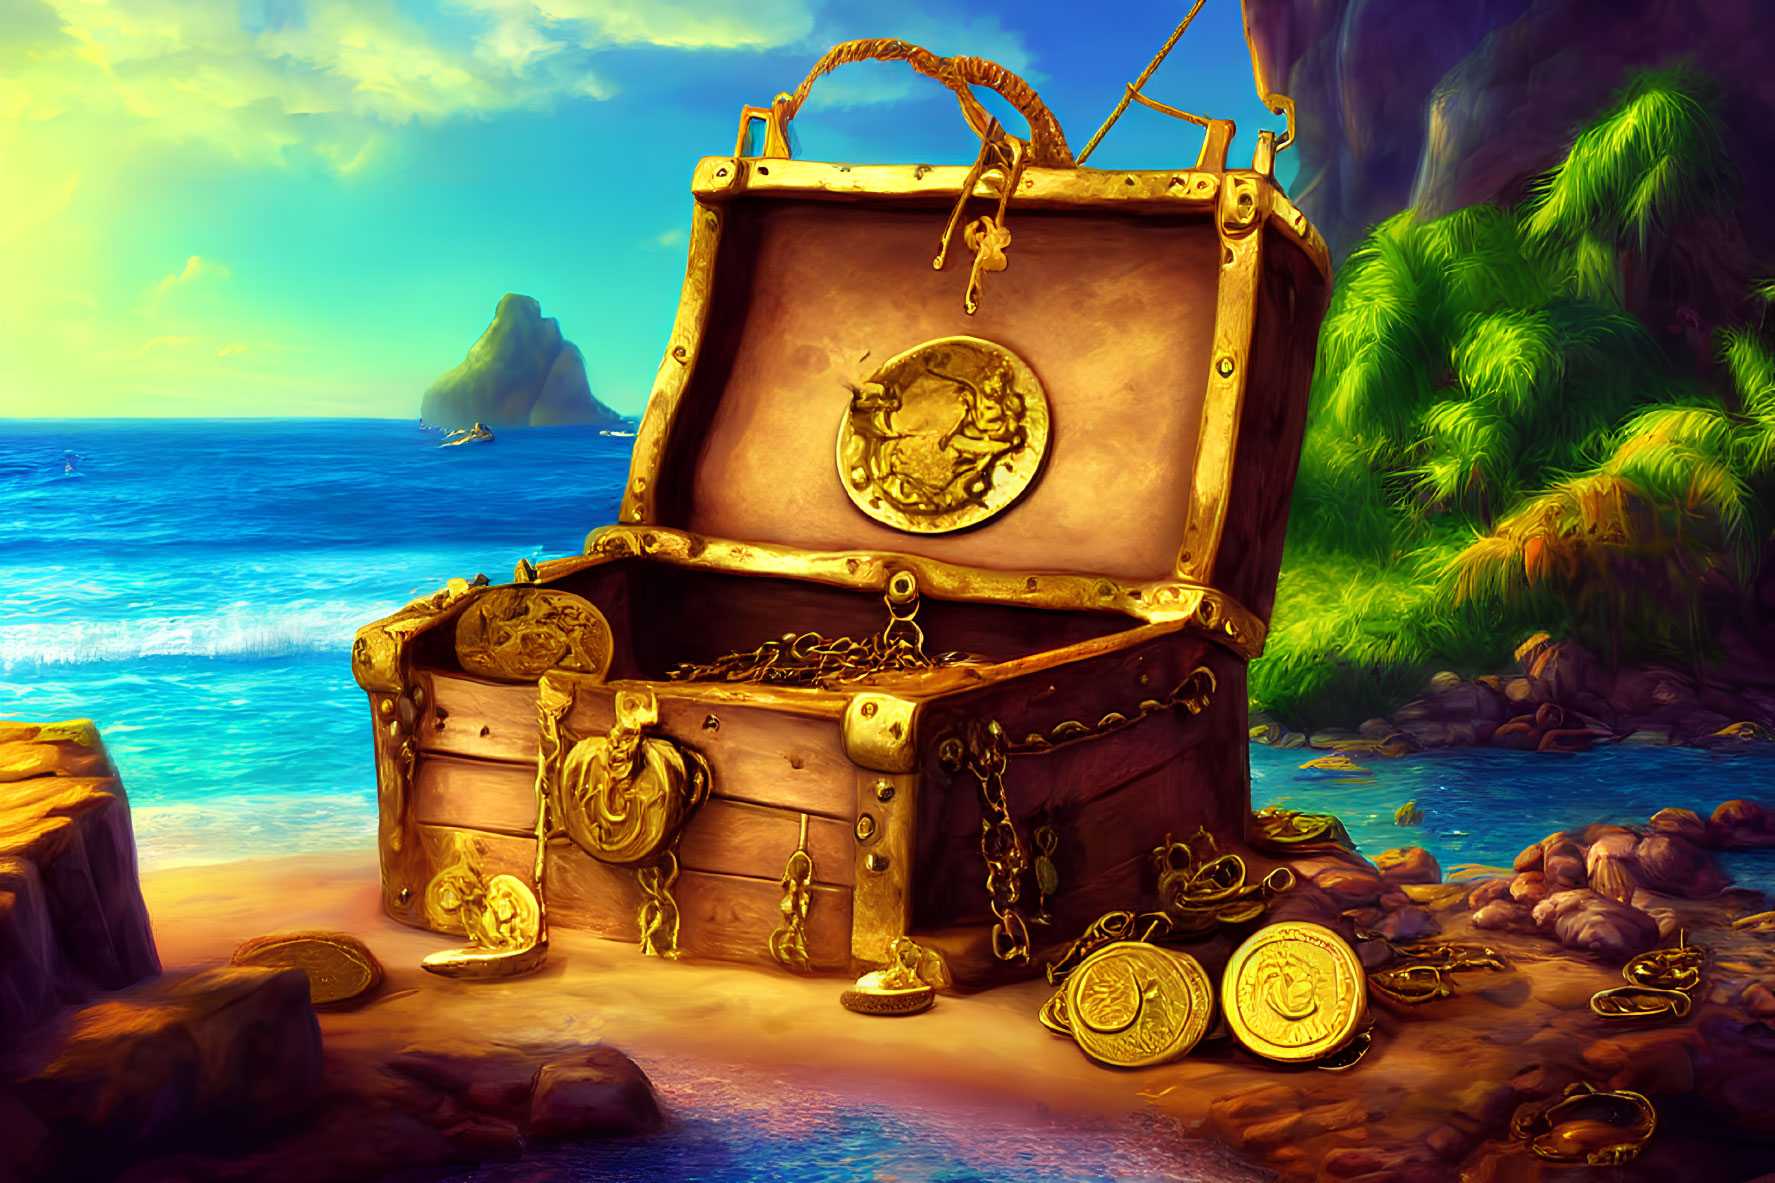 Treasure chest filled with gold coins on sandy beach with sea view